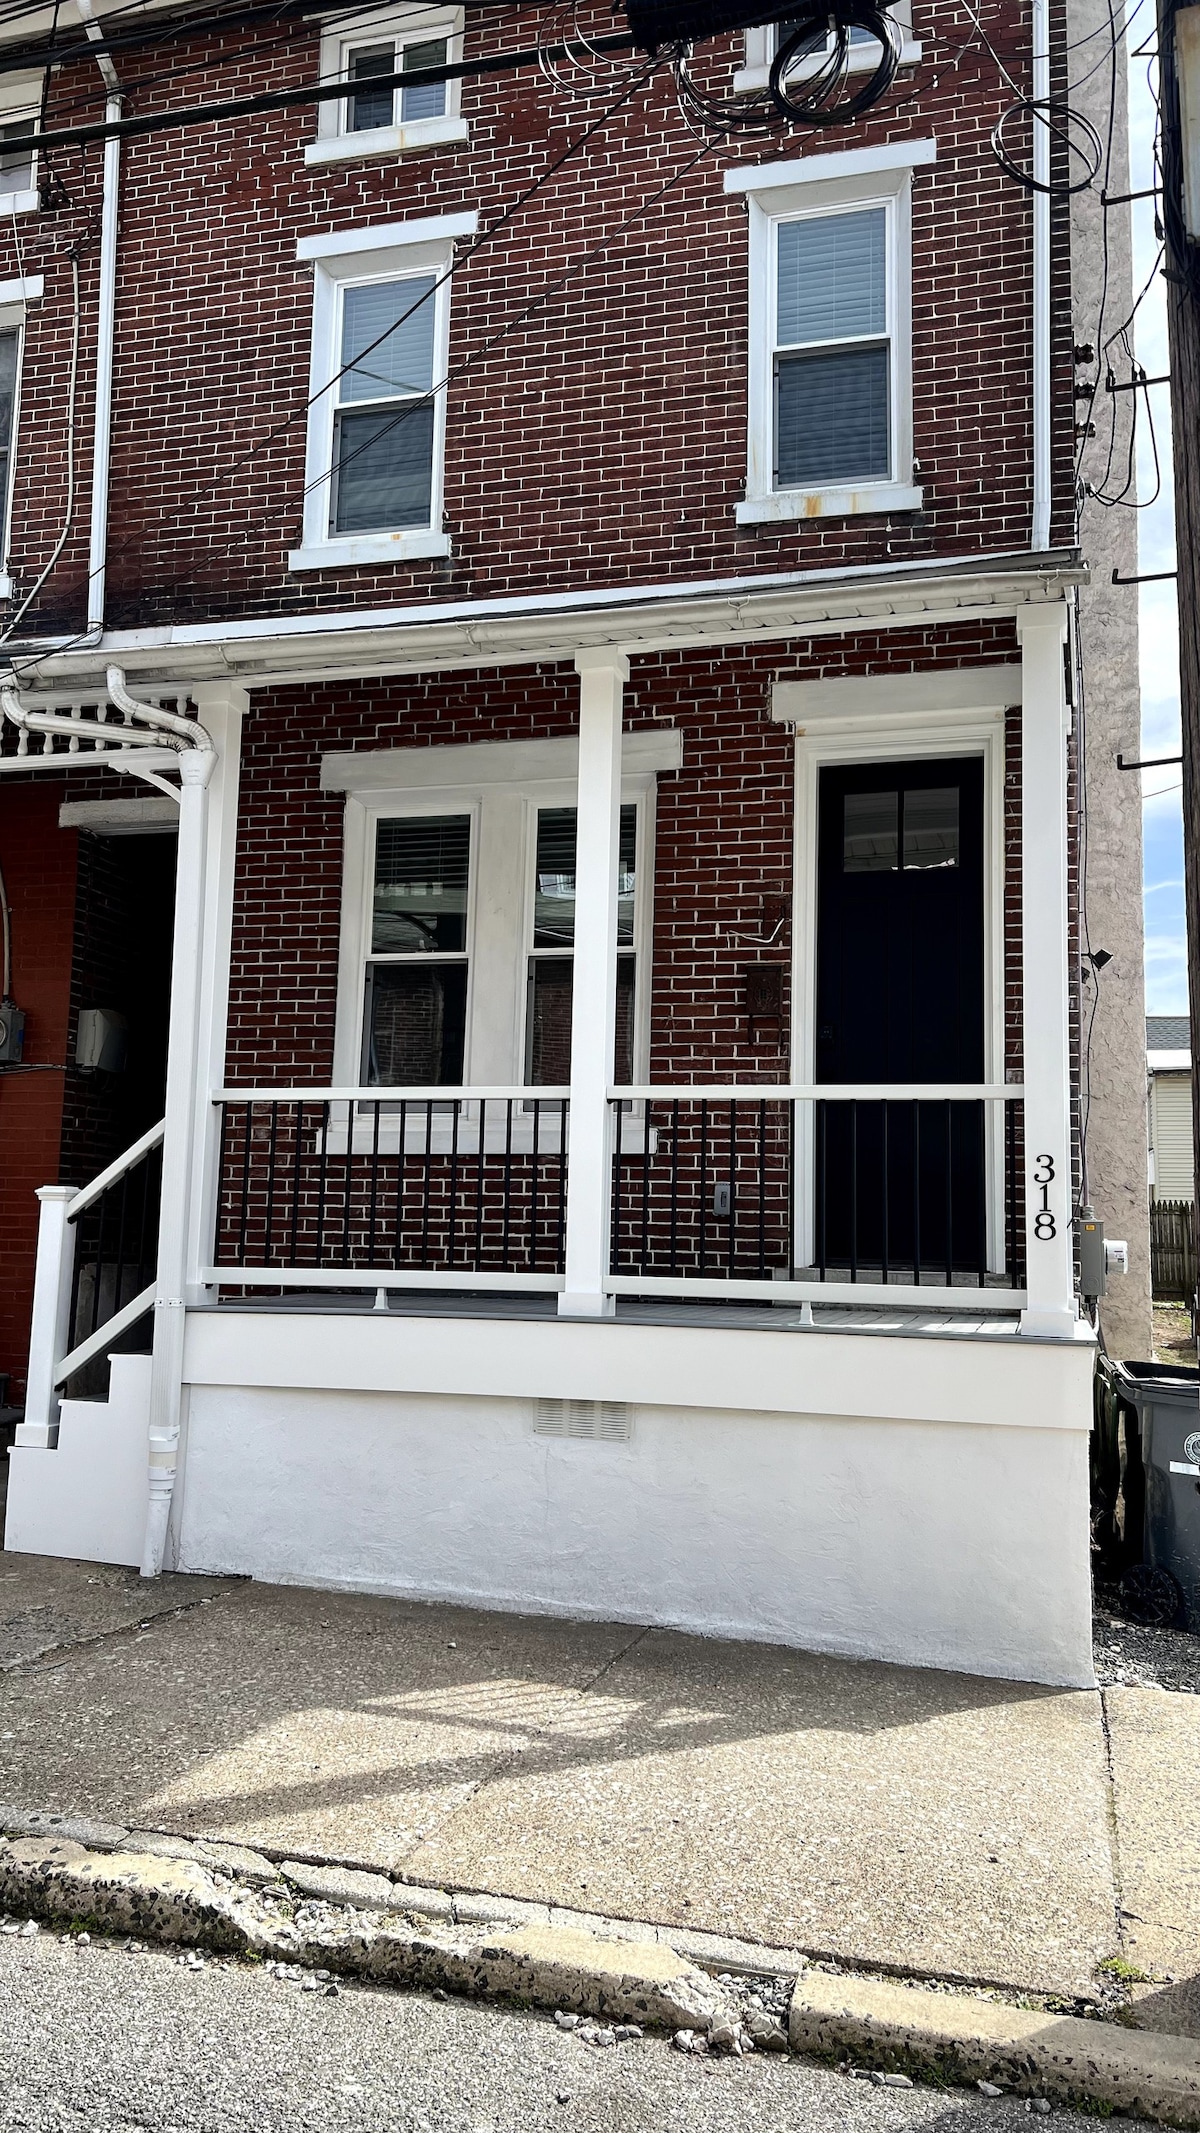 South Side Beauty 4br,2 bath. Central air, parking